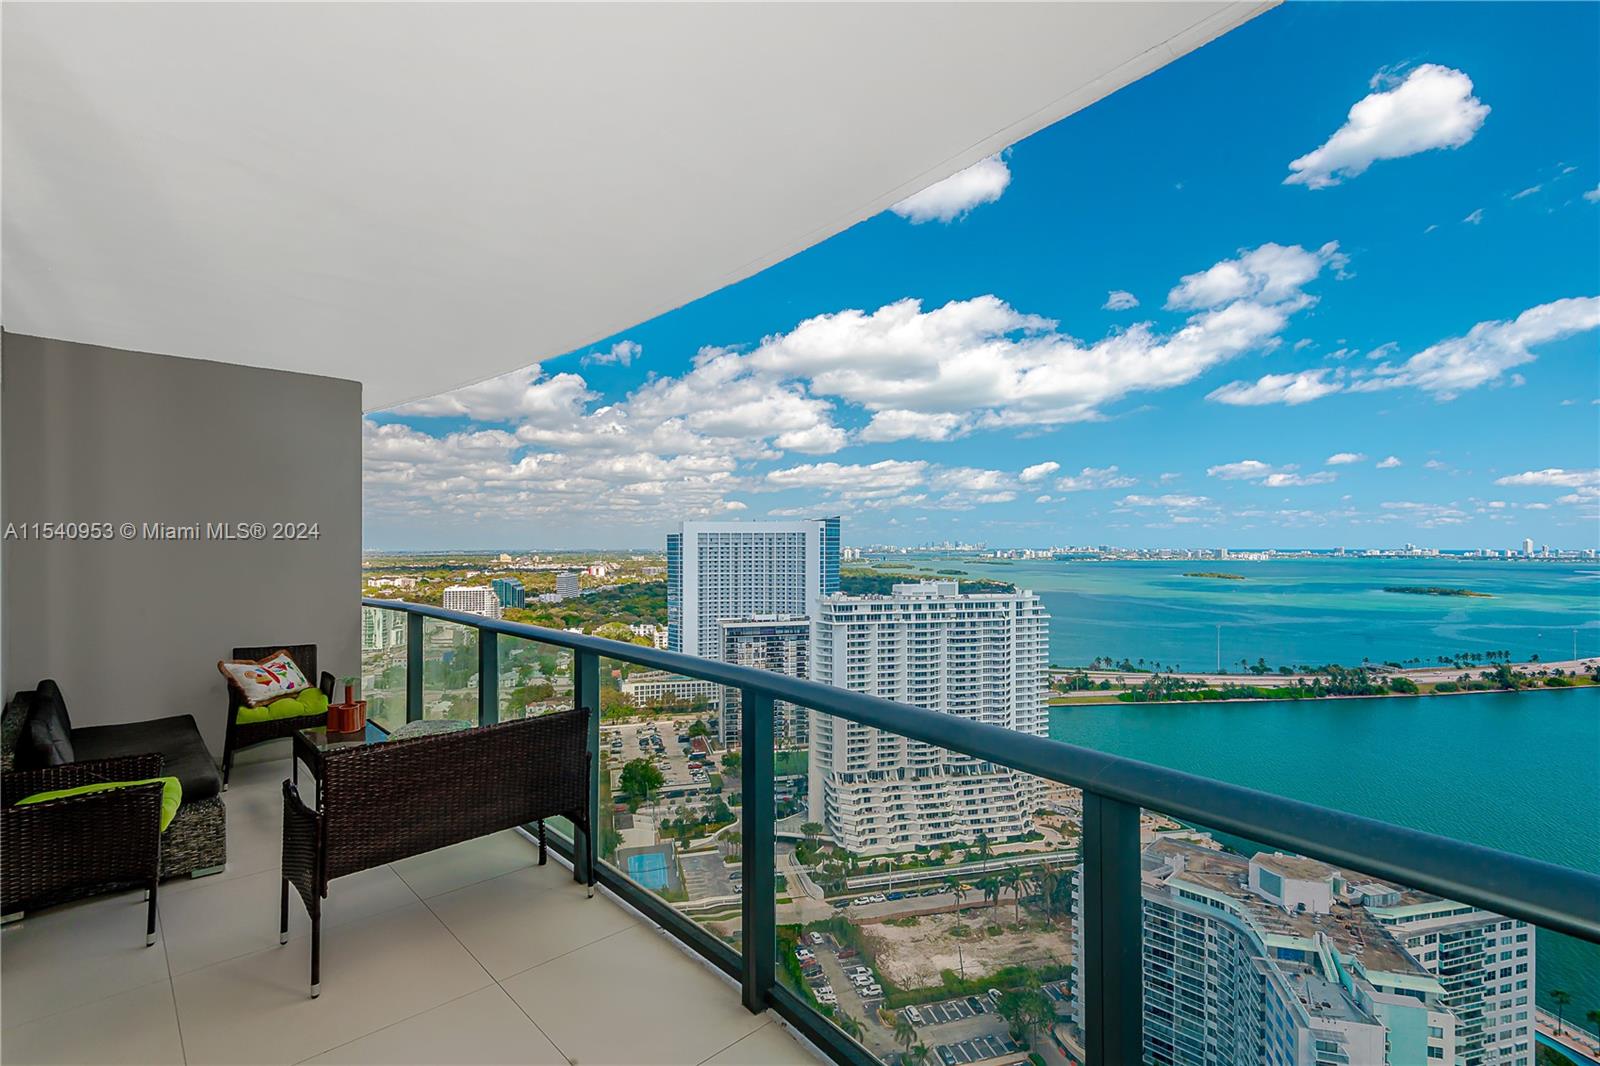 Highly desirable one bedroom, two bath floorplan with direct bay views. This unit is on the 32nd floor which features the deeper balcony (middle of bubble). Unit is nicely finished with tile floors, modern kitchen and bathroom. Master bathroom shower connects to guest bathroom giving you two full baths. The residences at Paraiso Bayviews have 9-foot high ceilings with floor-to-ceiling glass windows. The amenities at Paraiso Bayviews include a rooftop pool, sunset pool, tennis court, paddle court, BBQ areas, children’s’ playroom, billiard’s room, state-of-the-art fitness center, theater, spa, valet parking, and concierge.